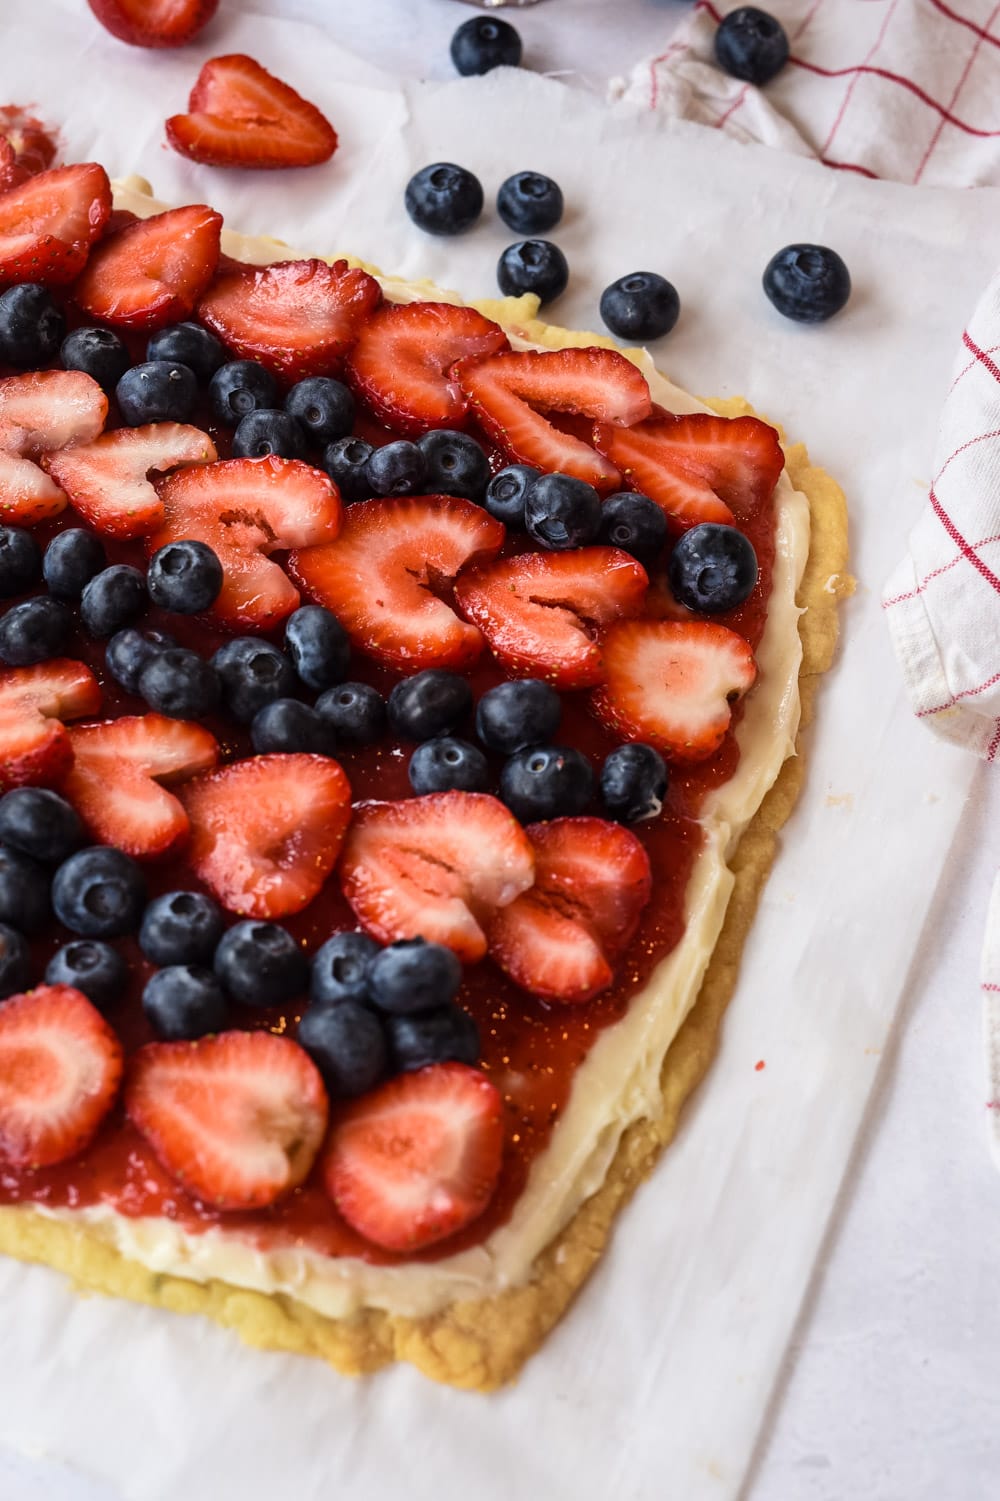 red white and blue fruit pizza